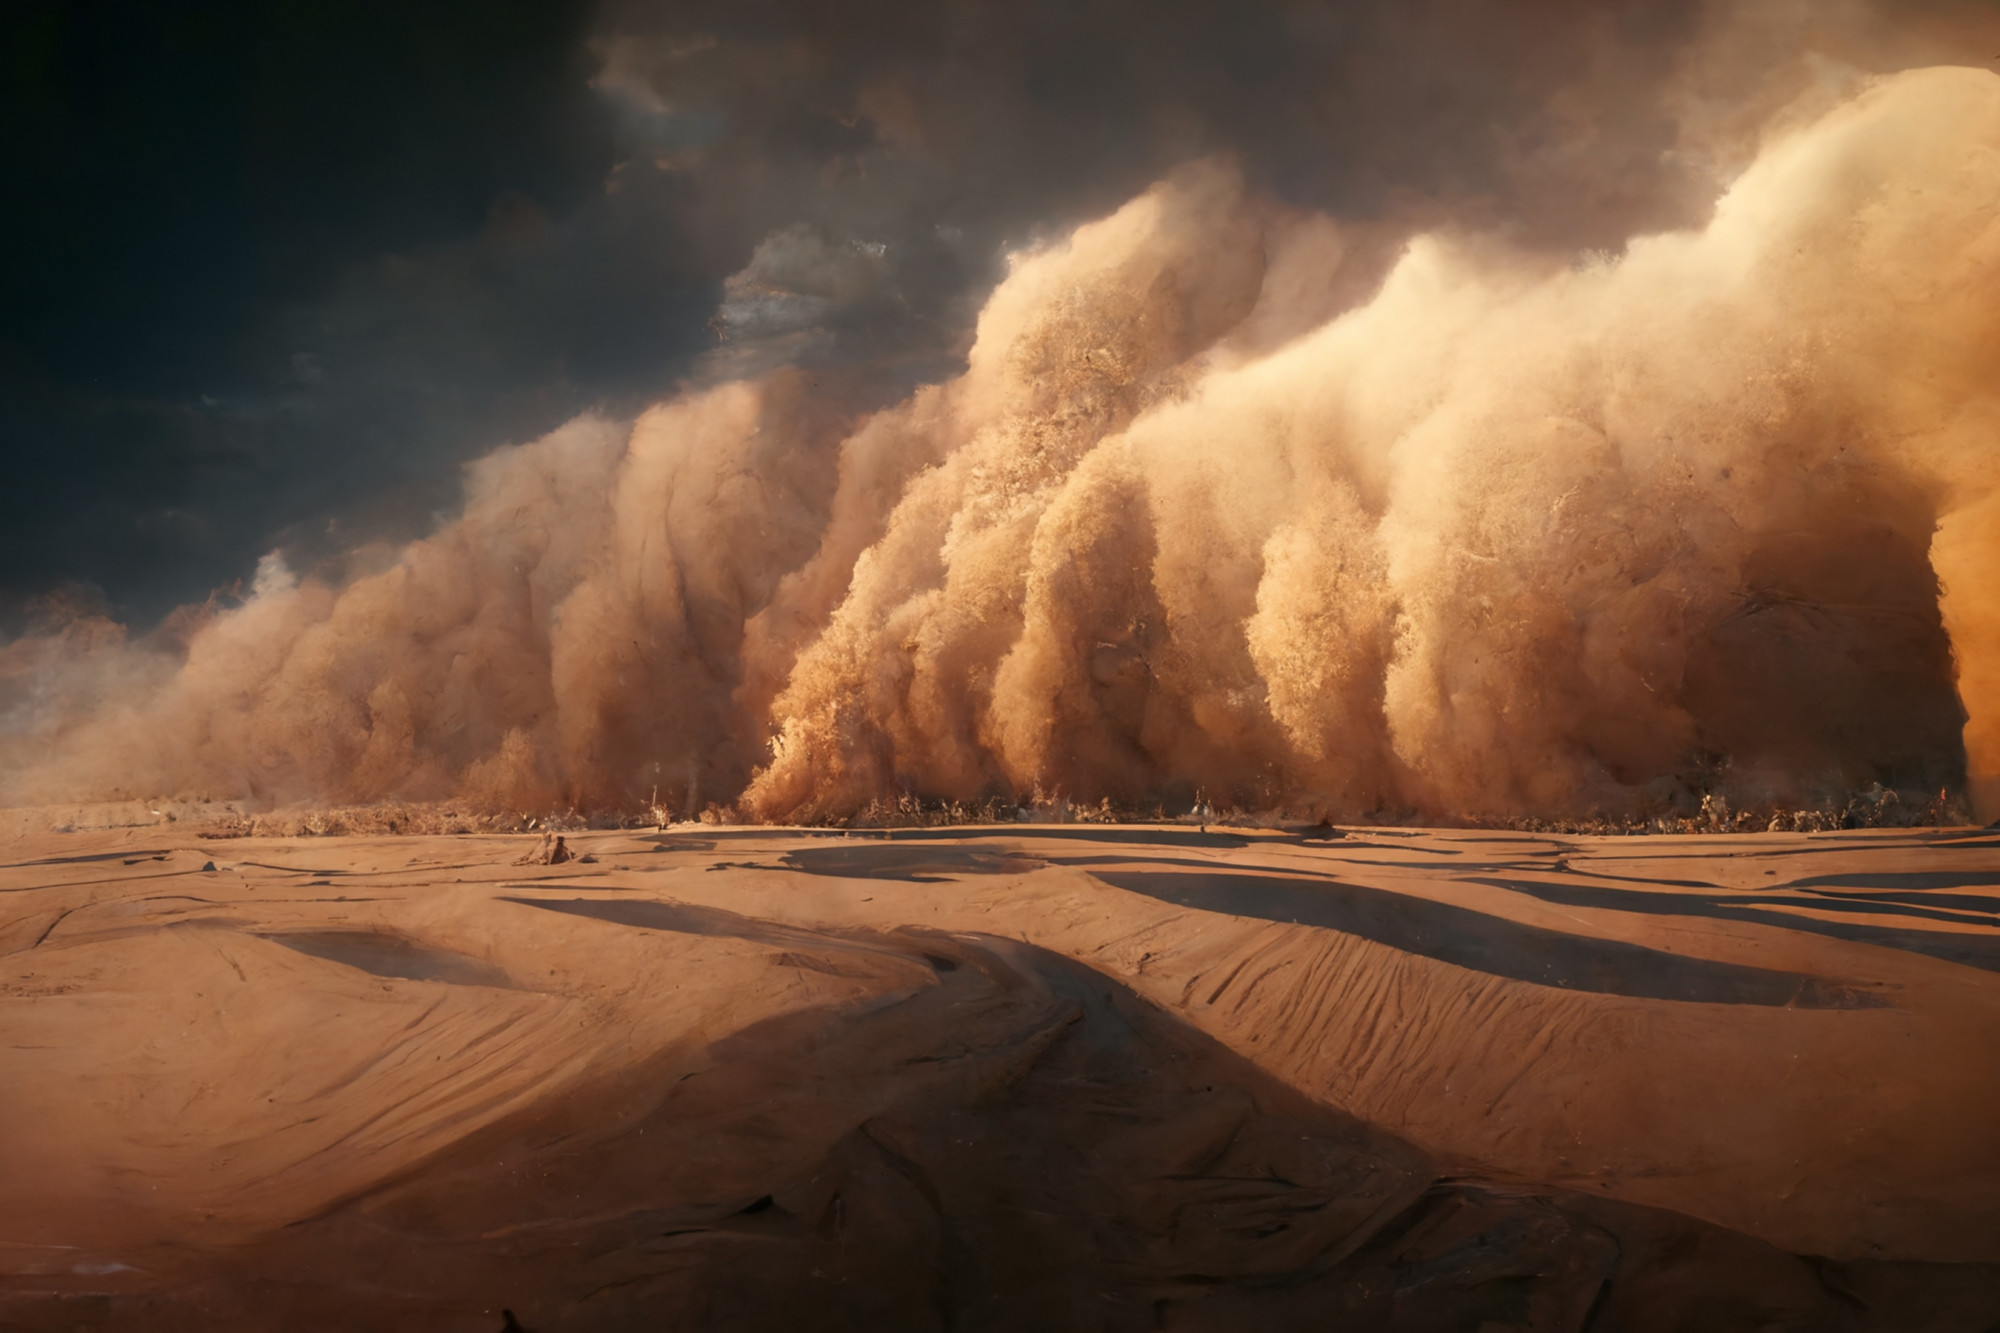 An image of a gathering sandstorm in the desert, set against the backdrop of dark skys